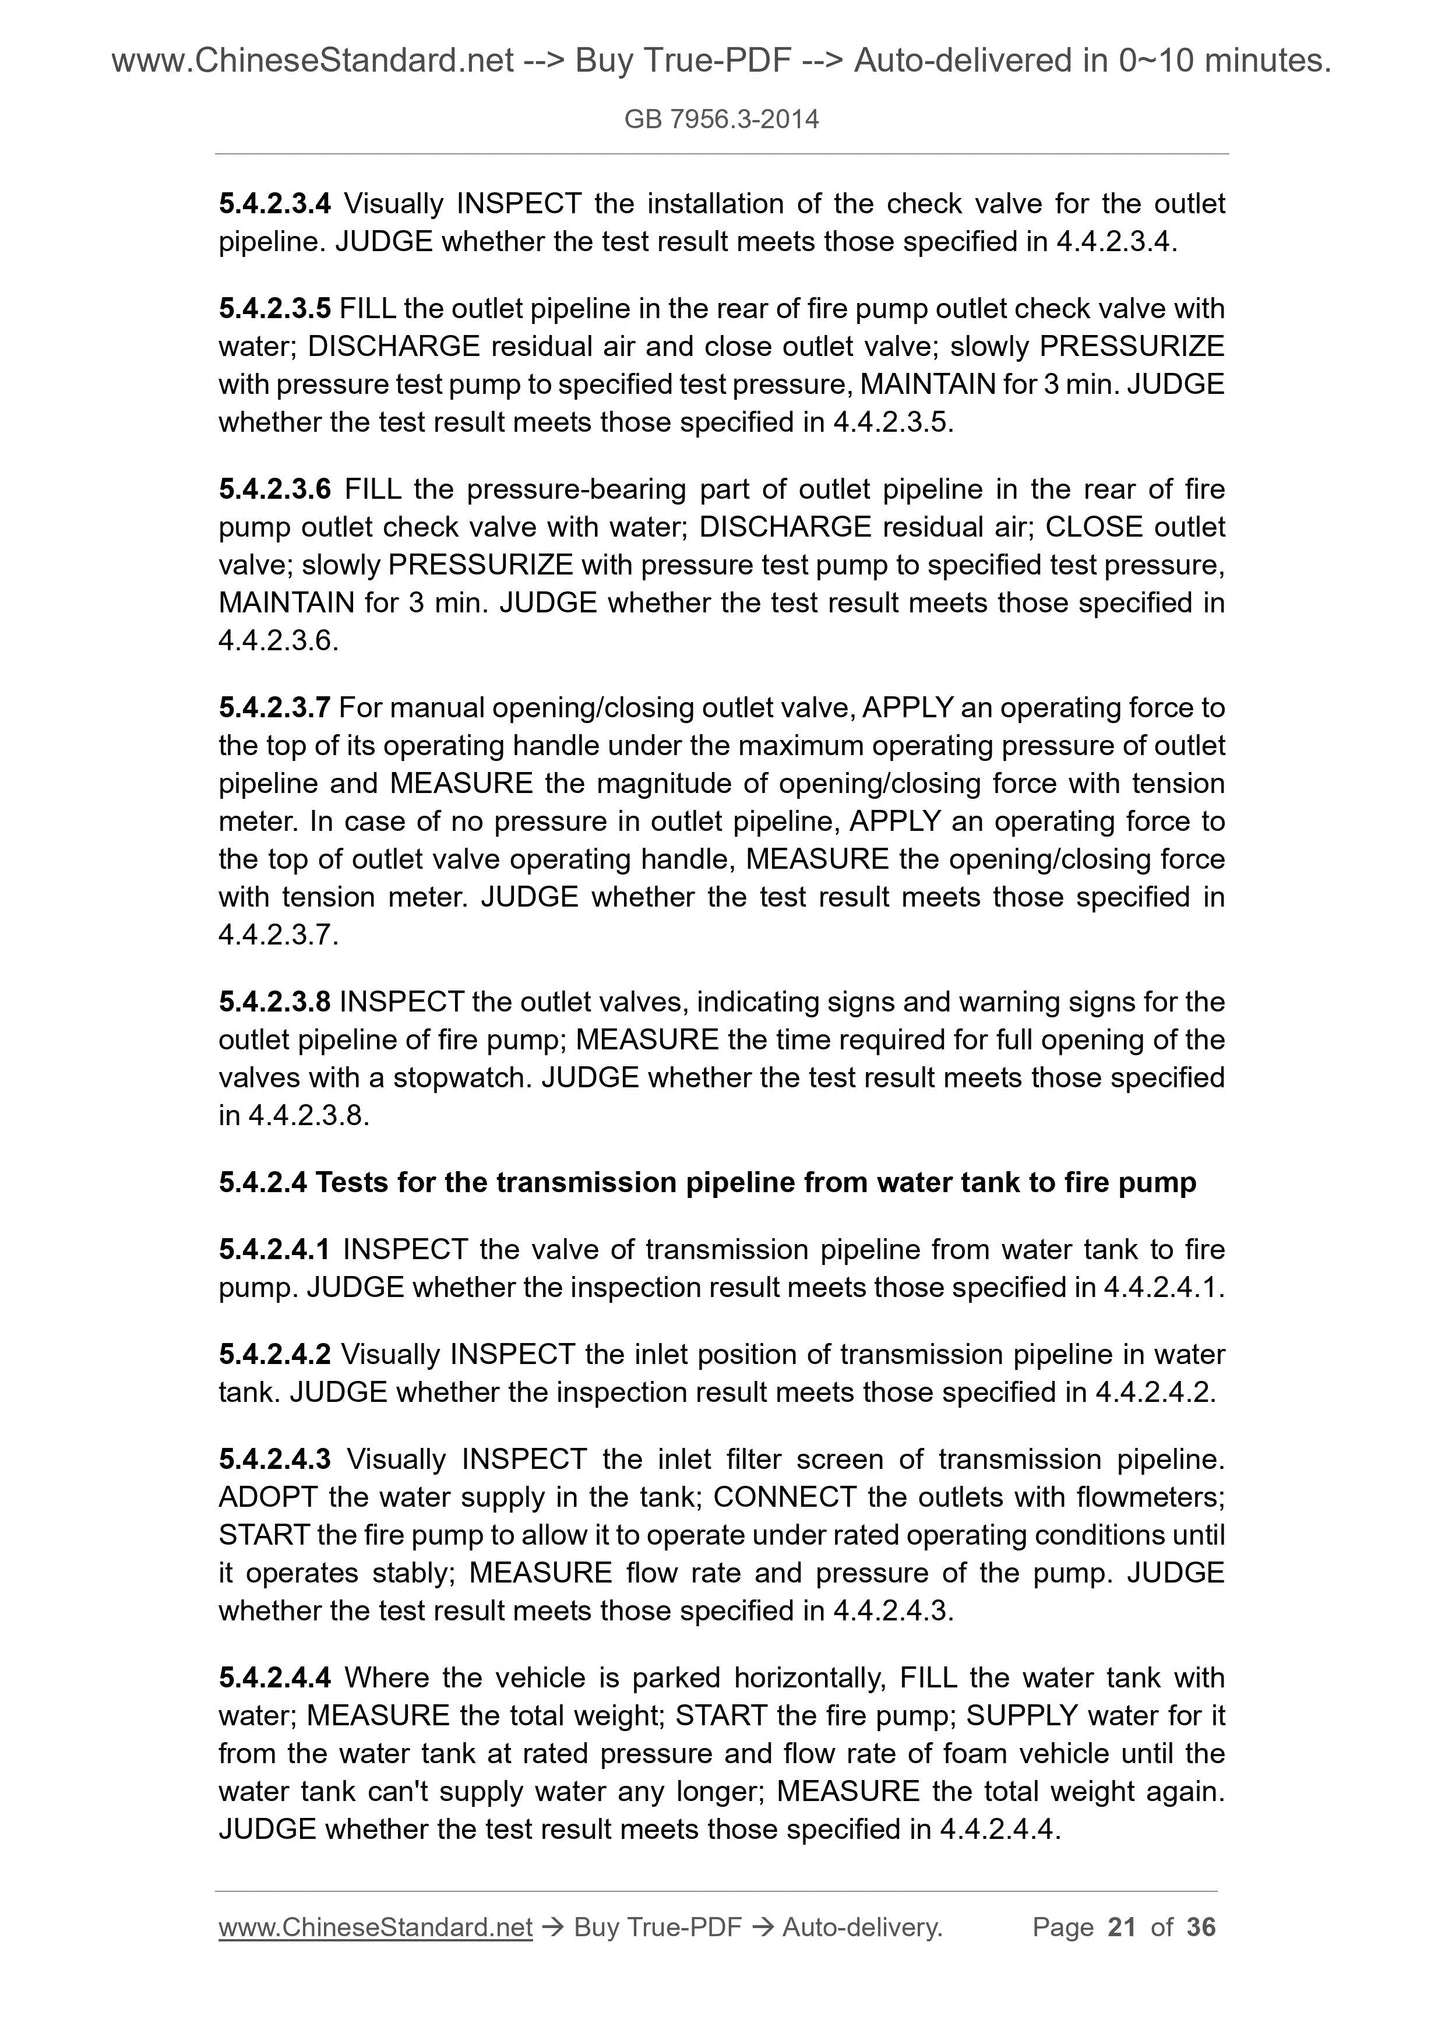 GB 7956.3-2014 Page 11